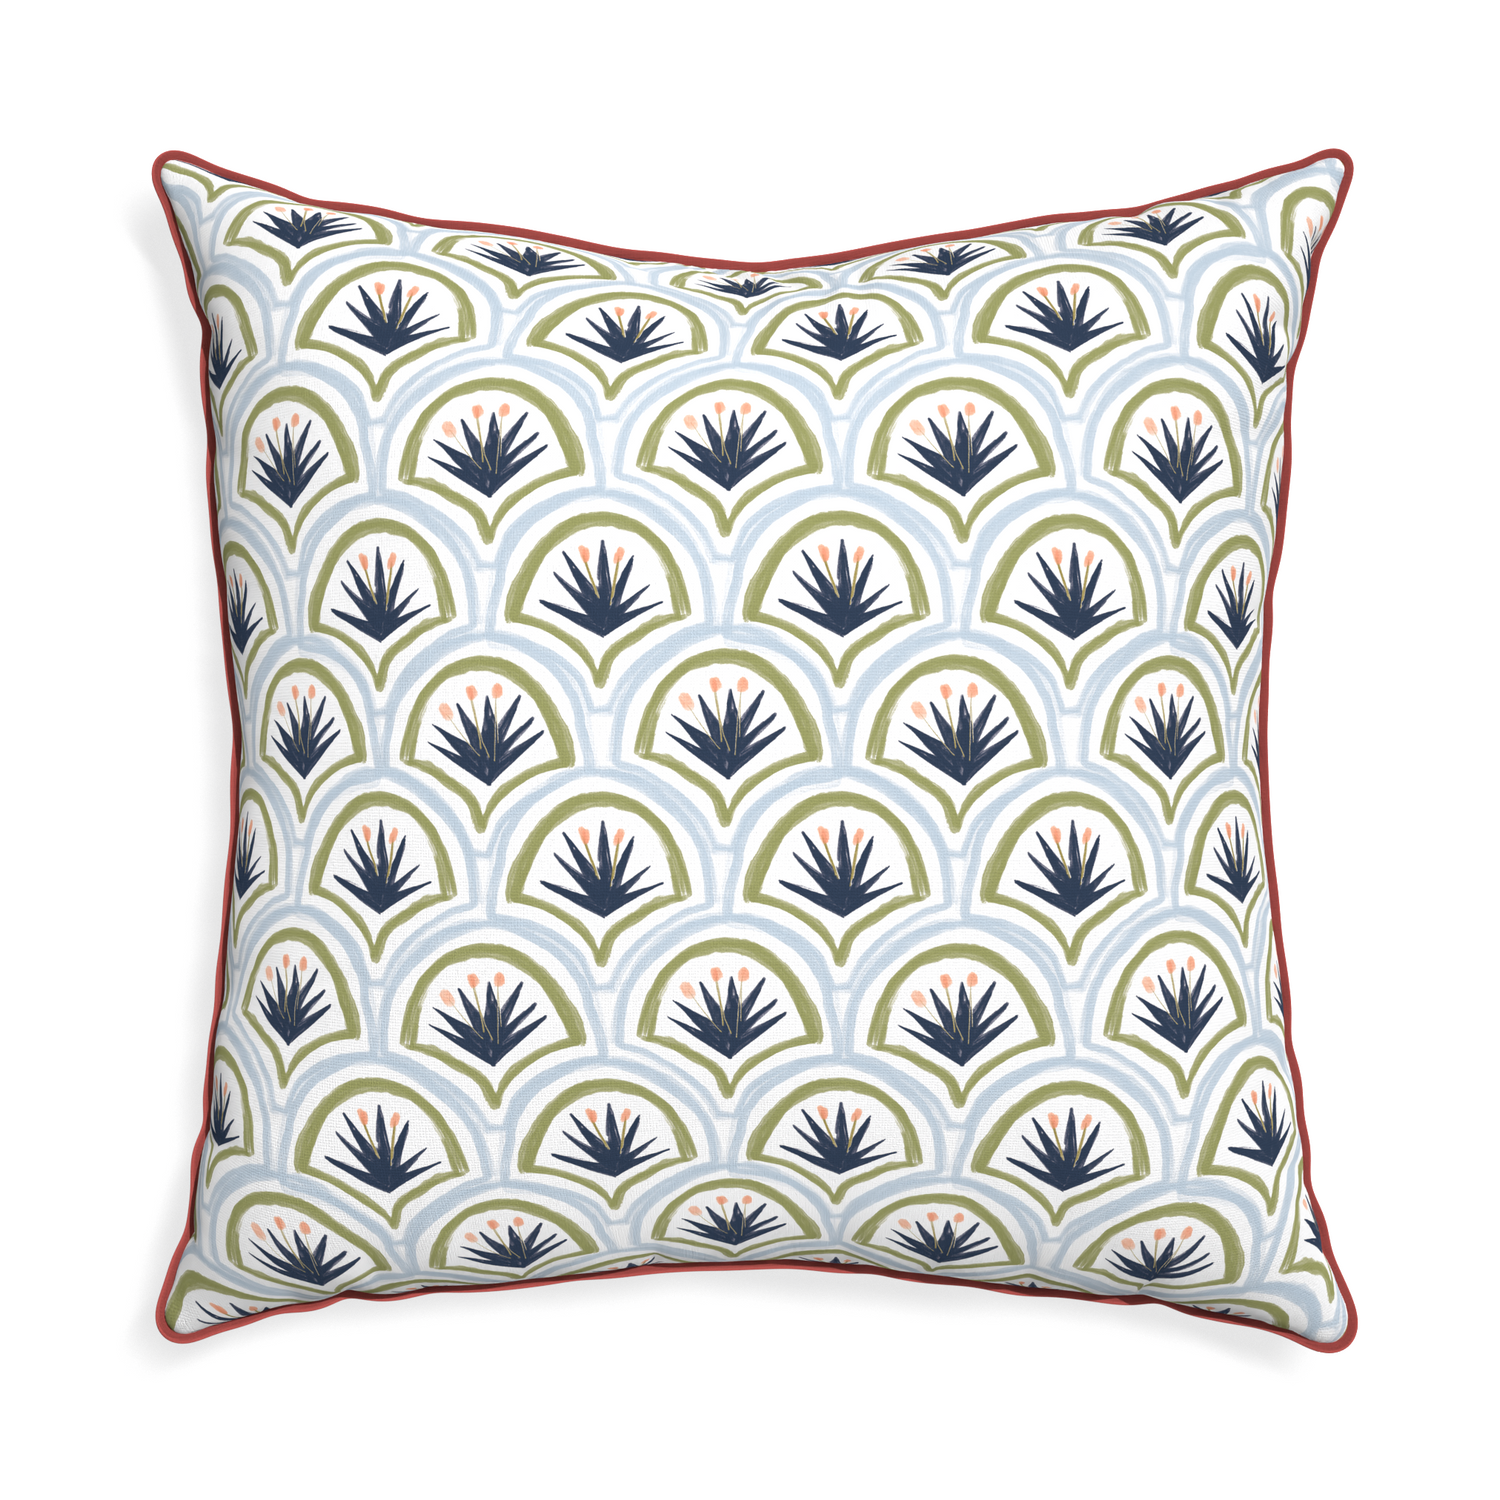 Euro-sham thatcher midnight custom art deco palm patternpillow with c piping on white background